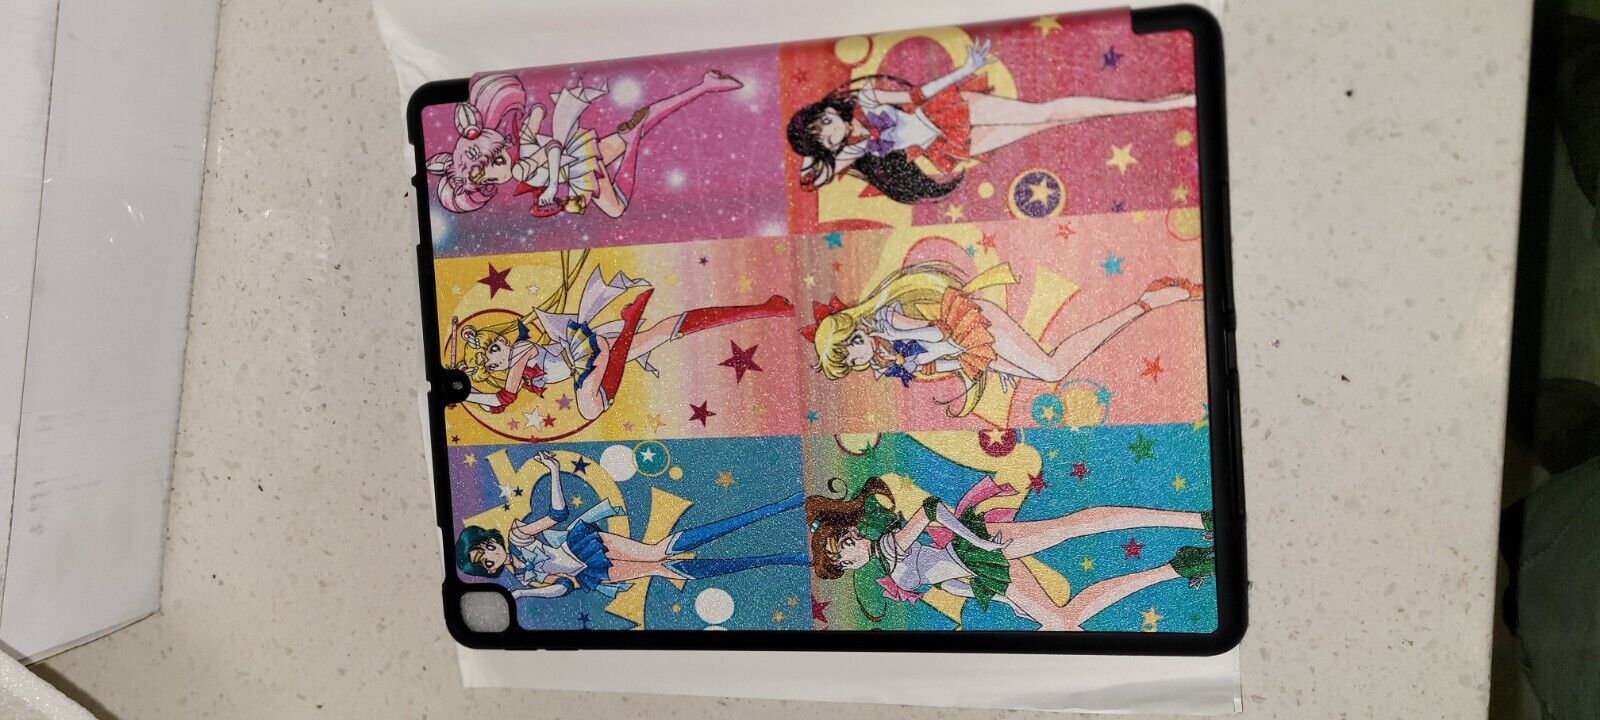 sailor moon Ipad case For Gen 7, 8, And 9